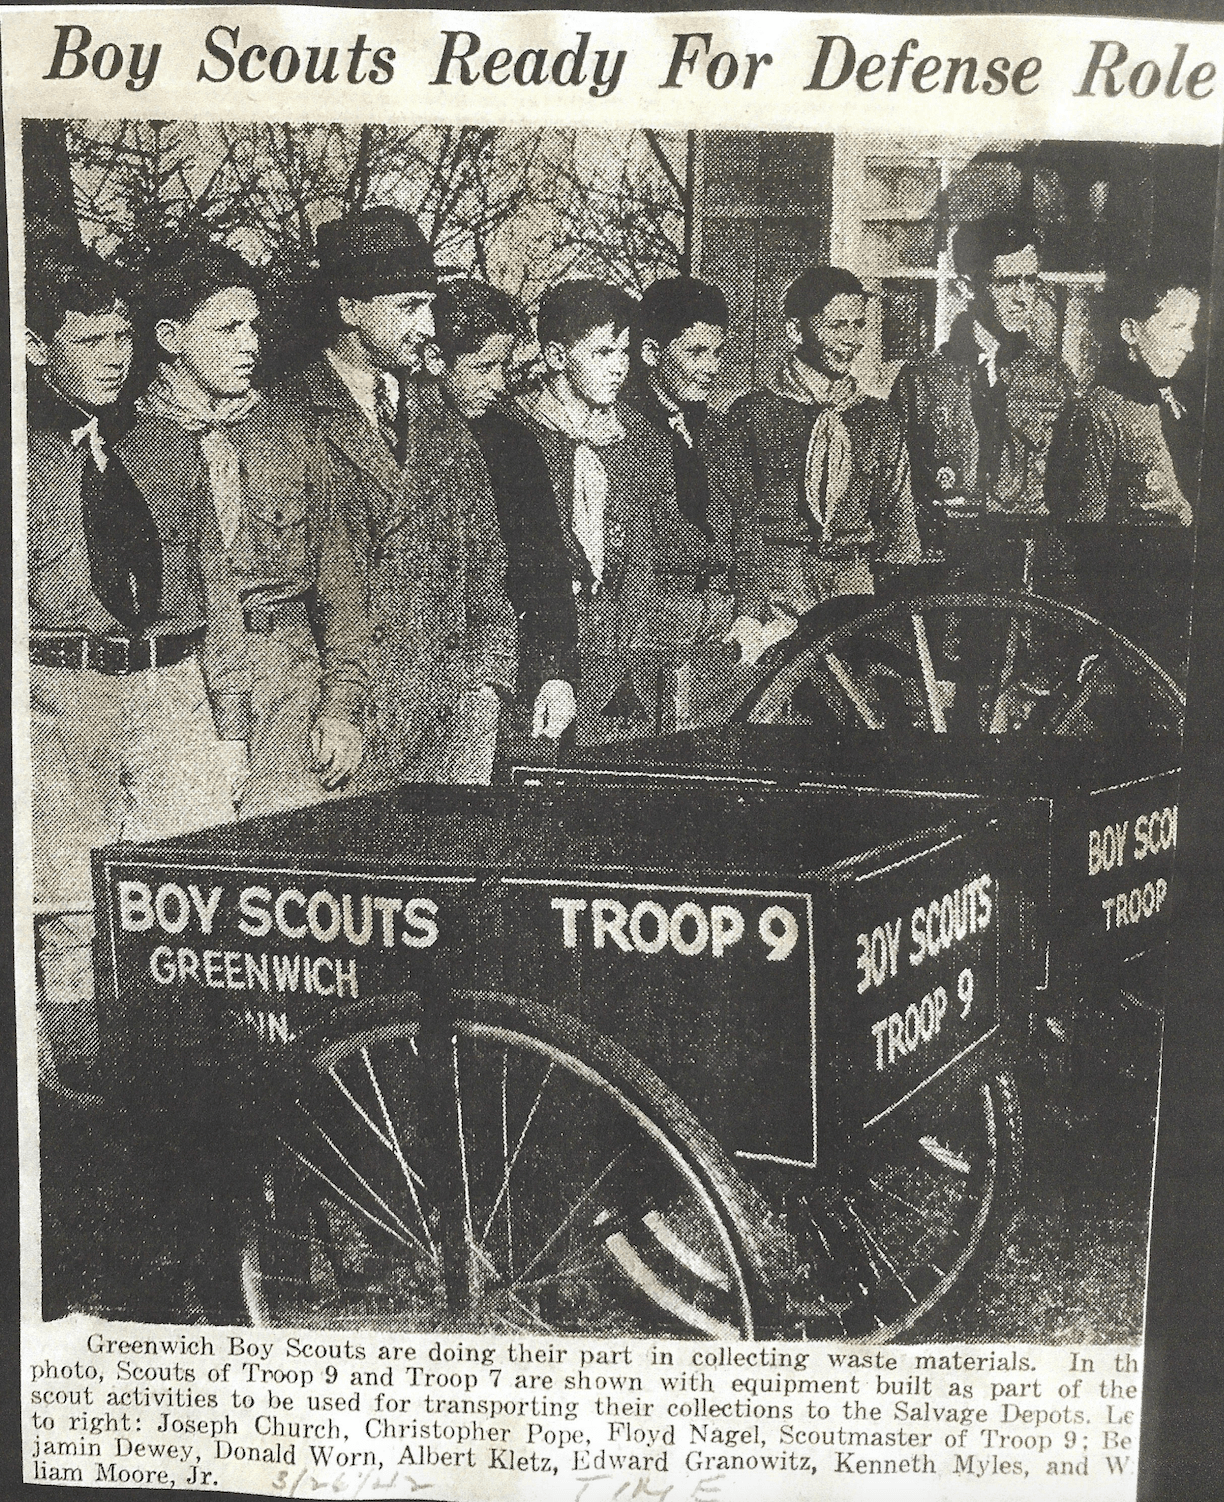 Another photo from the archives is a photo of Troop 9 scouts standing with their wood-constructed wagons with the headline, “Boy Scouts Ready for Defense Role.”